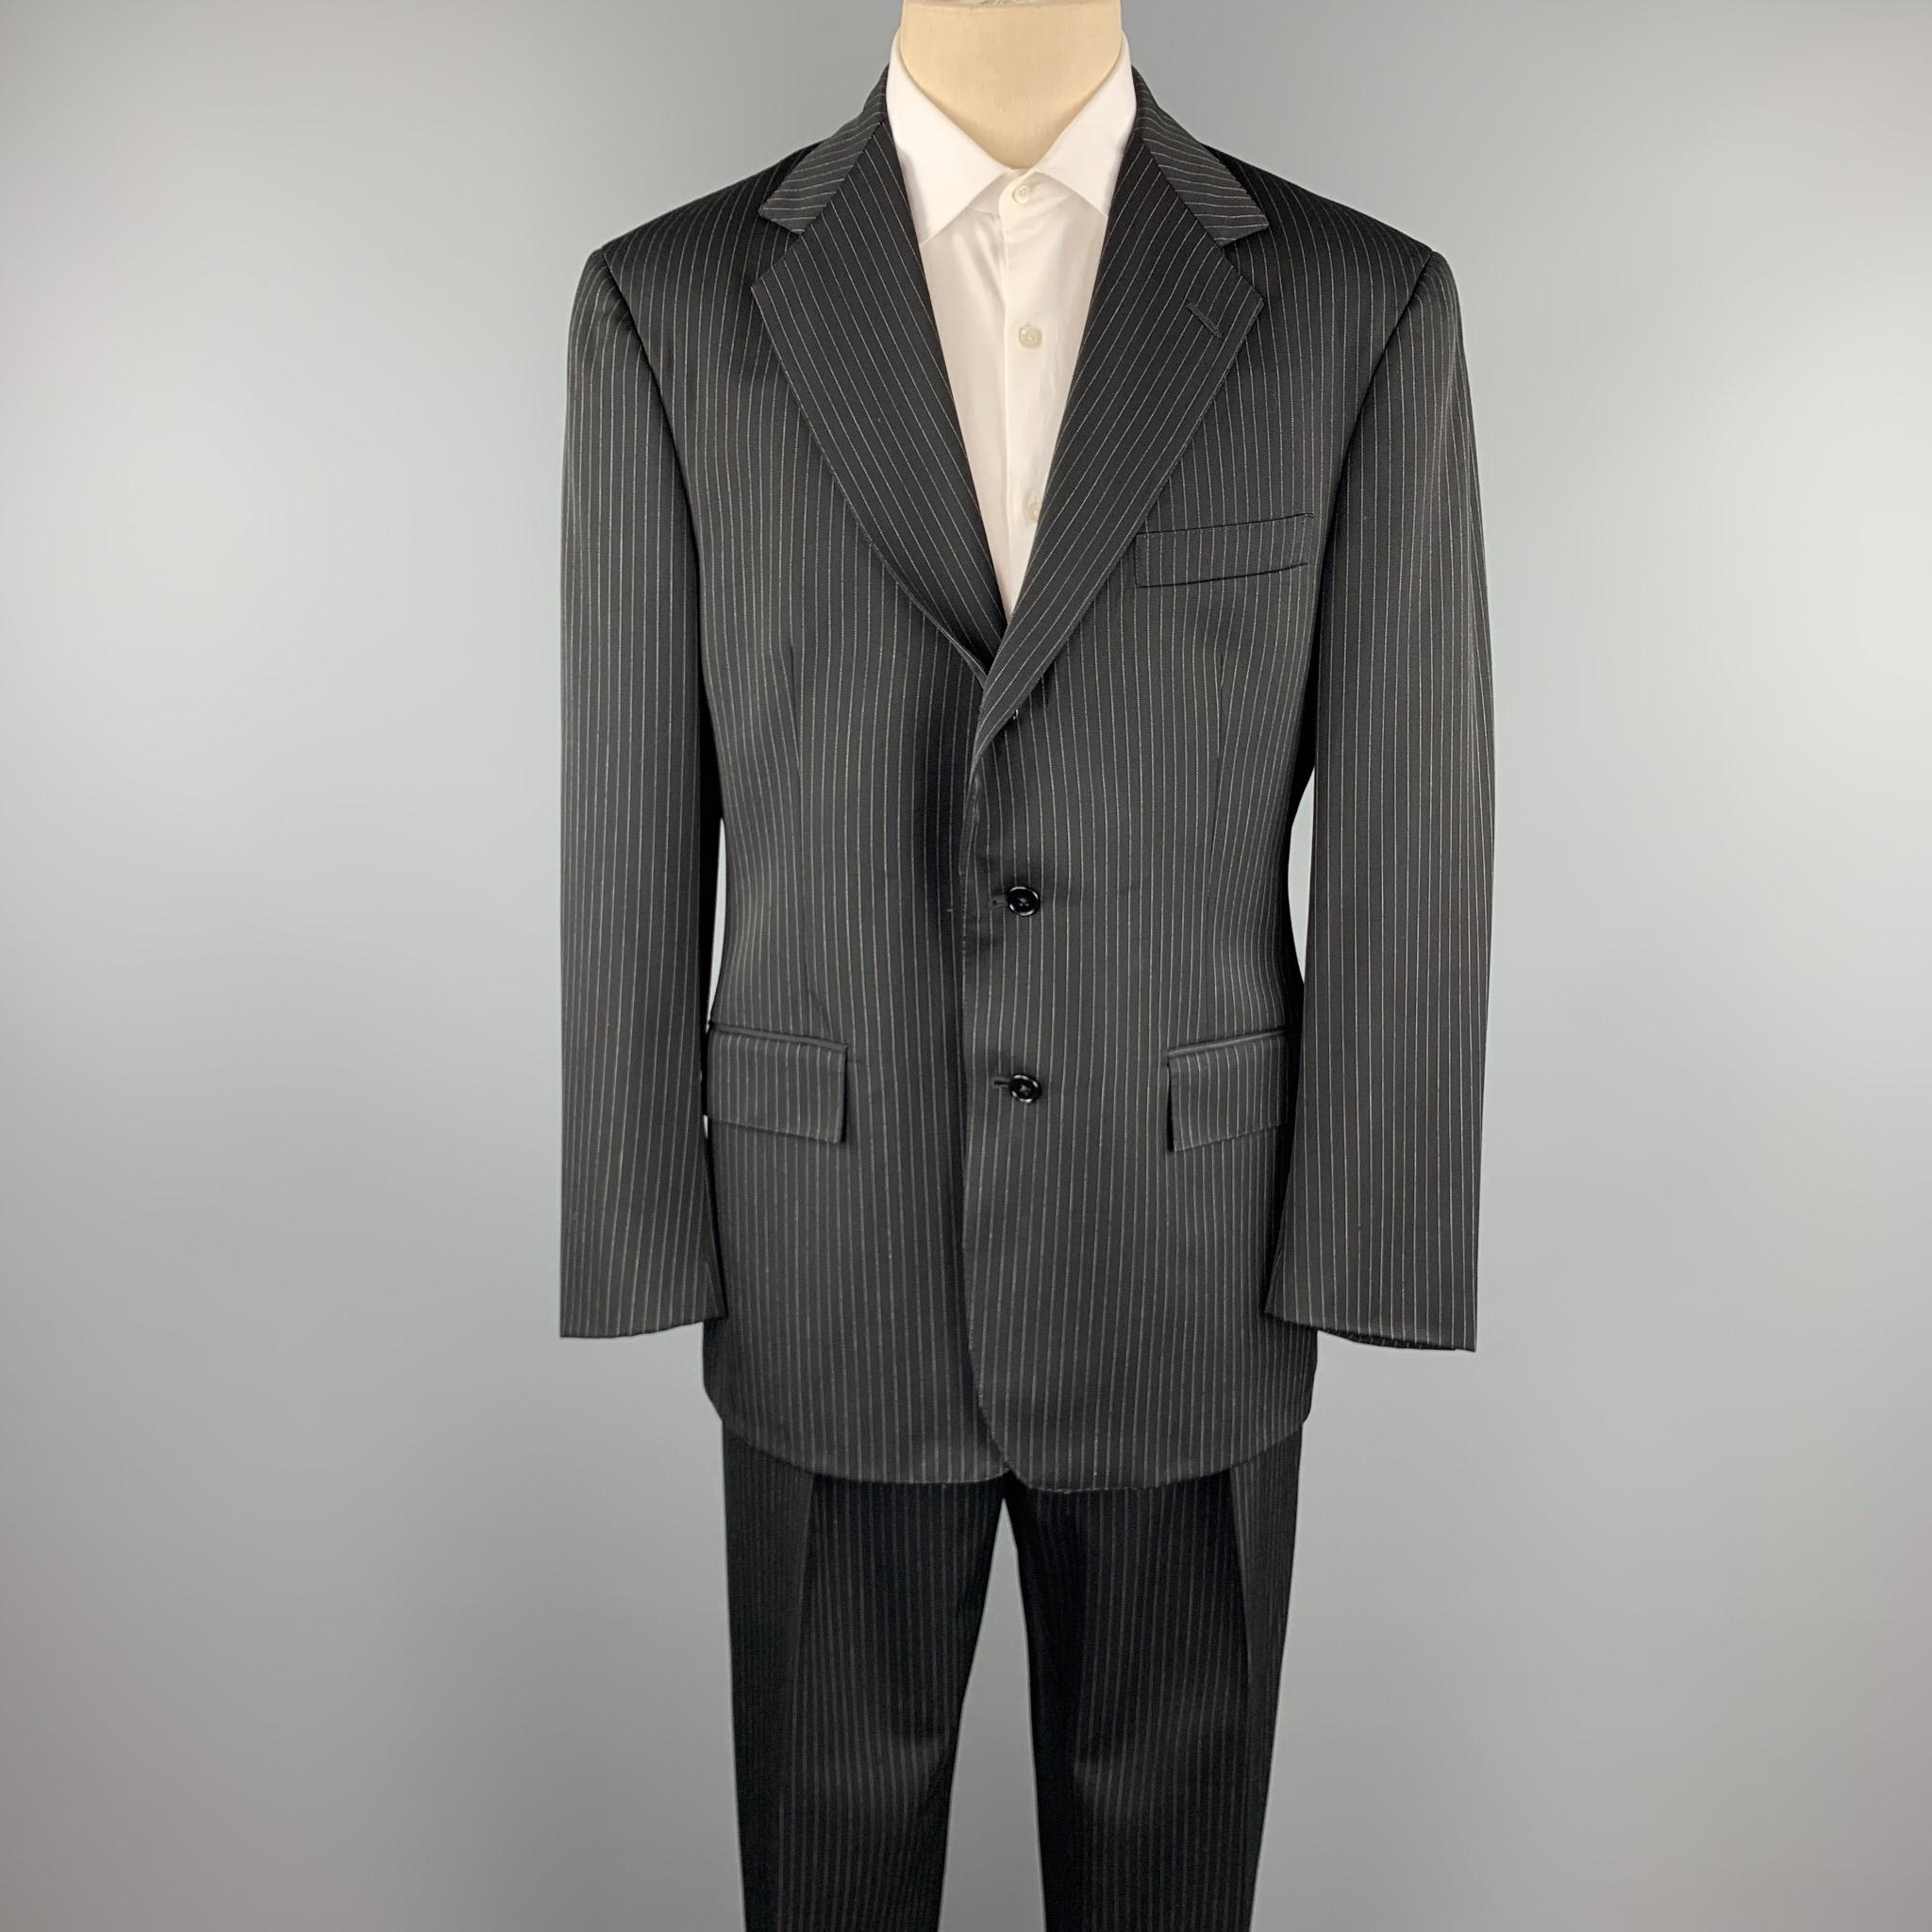 POLO by RALPH LAUREN suit comes in a black stripe wool and includes a single breasted, three button sport coat with a notch lapel and matching flat front trousers. 

Very Good Pre-Owned Condition.
Marked: 40

Measurements:

-Jacket
Shoulder: 19.5